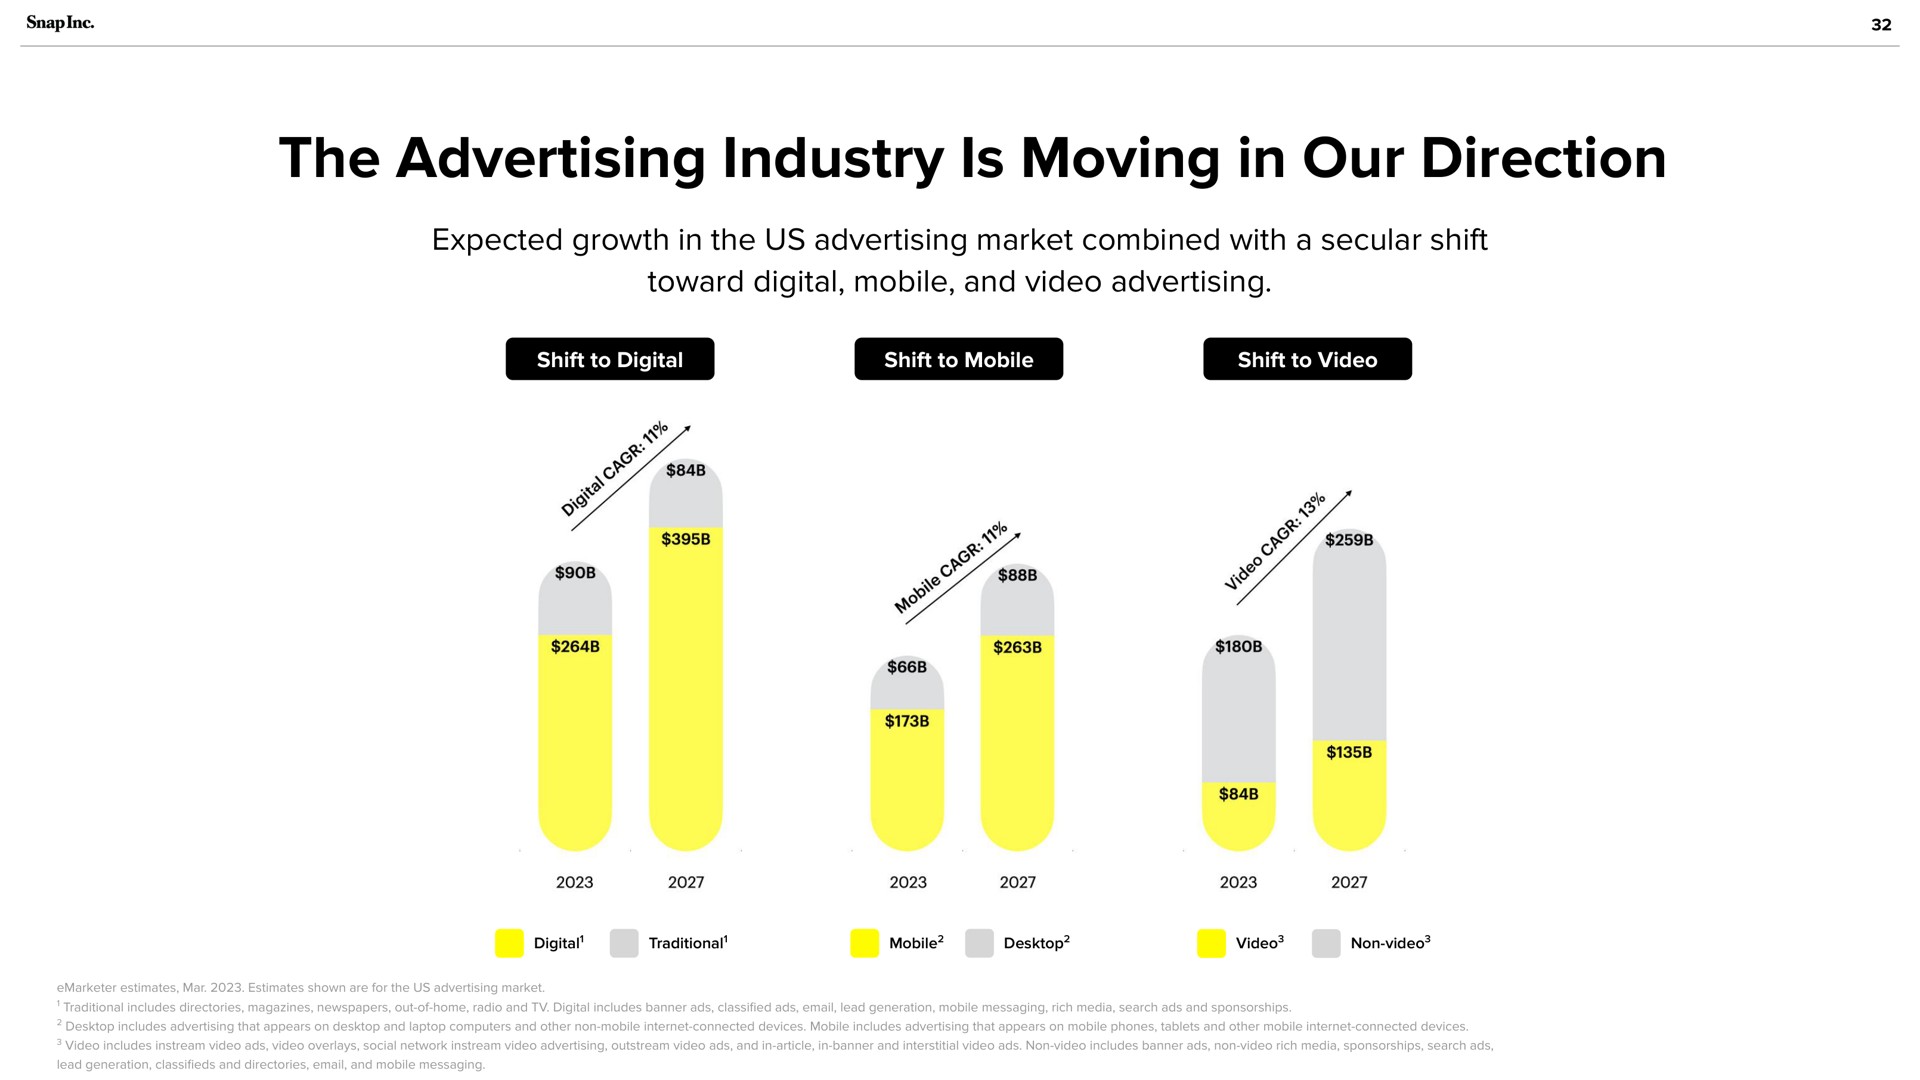 the advertising industry is moving in our direction | Snap Inc